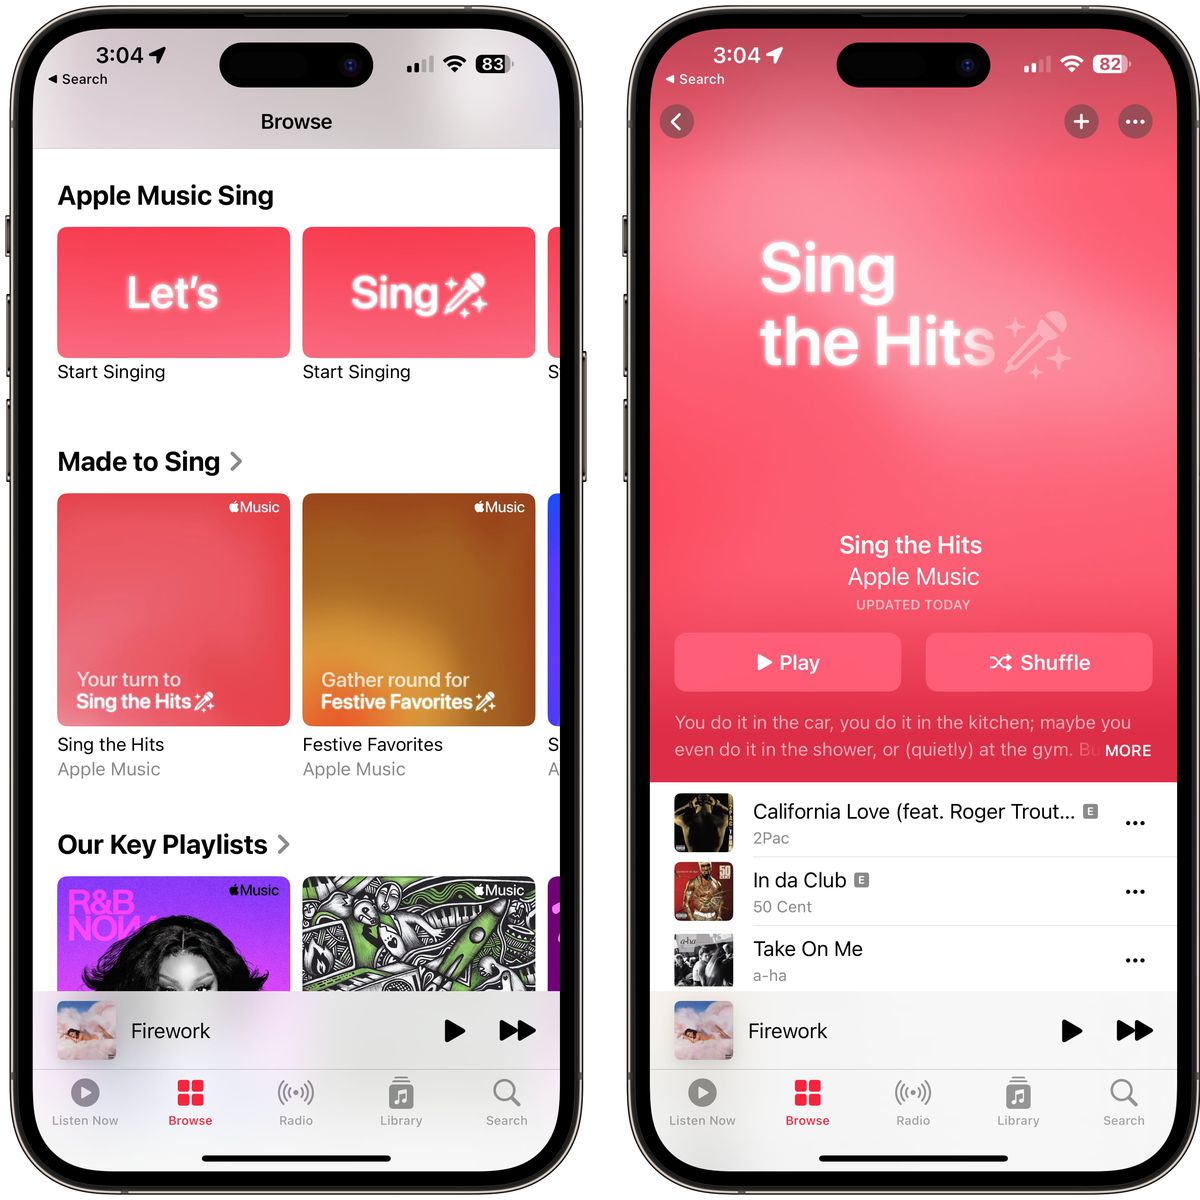 New Apple Music Sing Playlists Now Available in iOS 16.2 - MacRumors